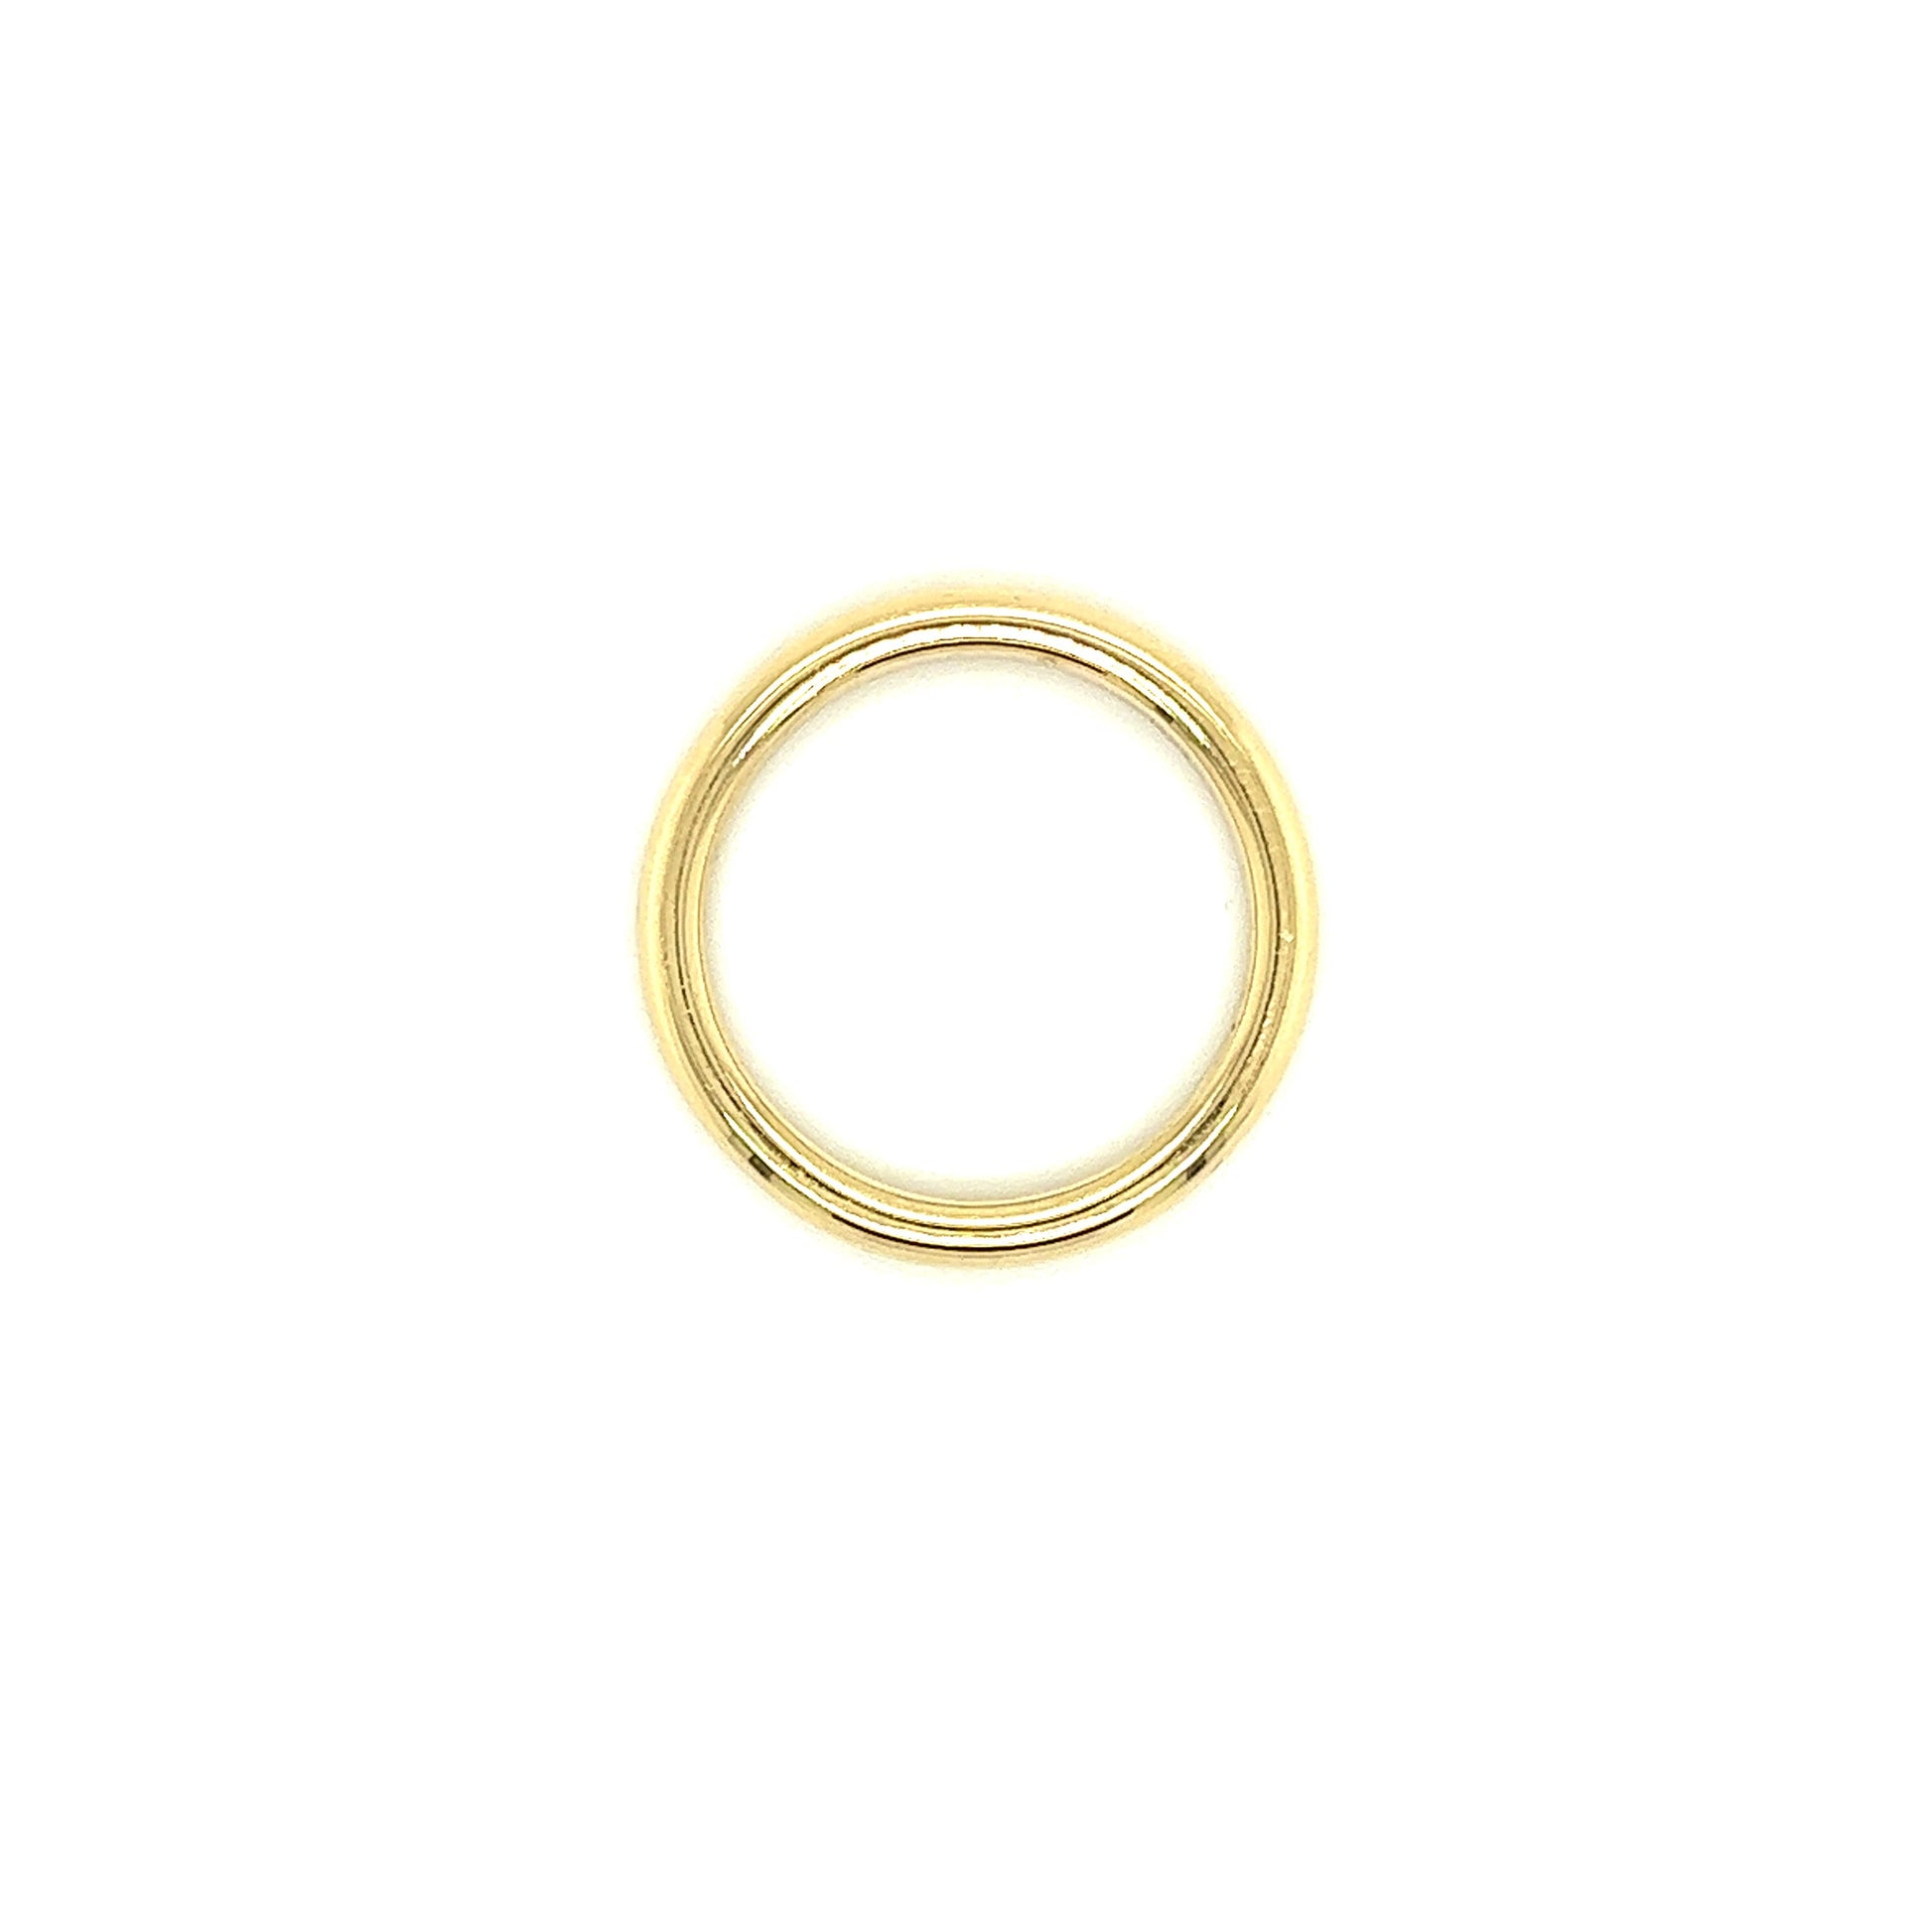 Half Round 2.5mm Ring with Comfort Fit in 14K Yellow Gold Top View